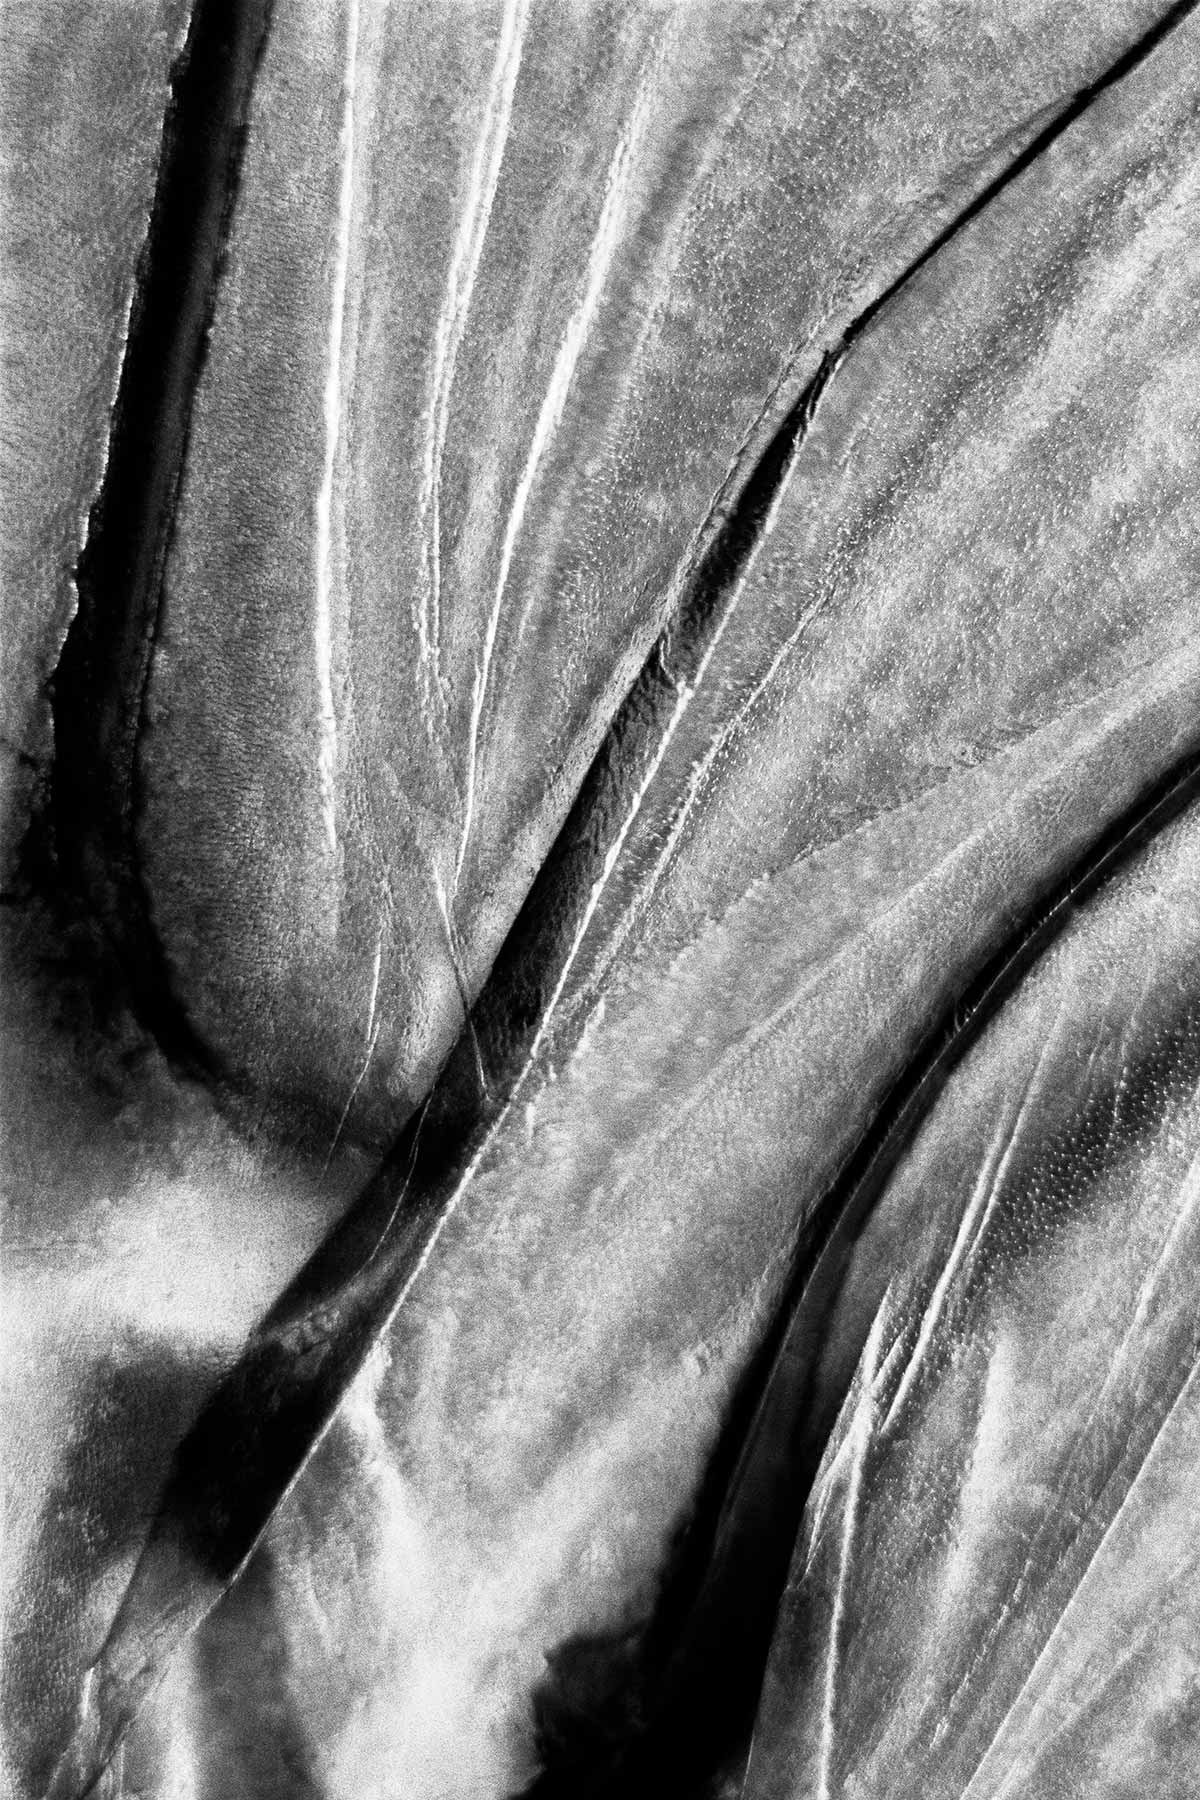 June Bug, Insect Wing Detail